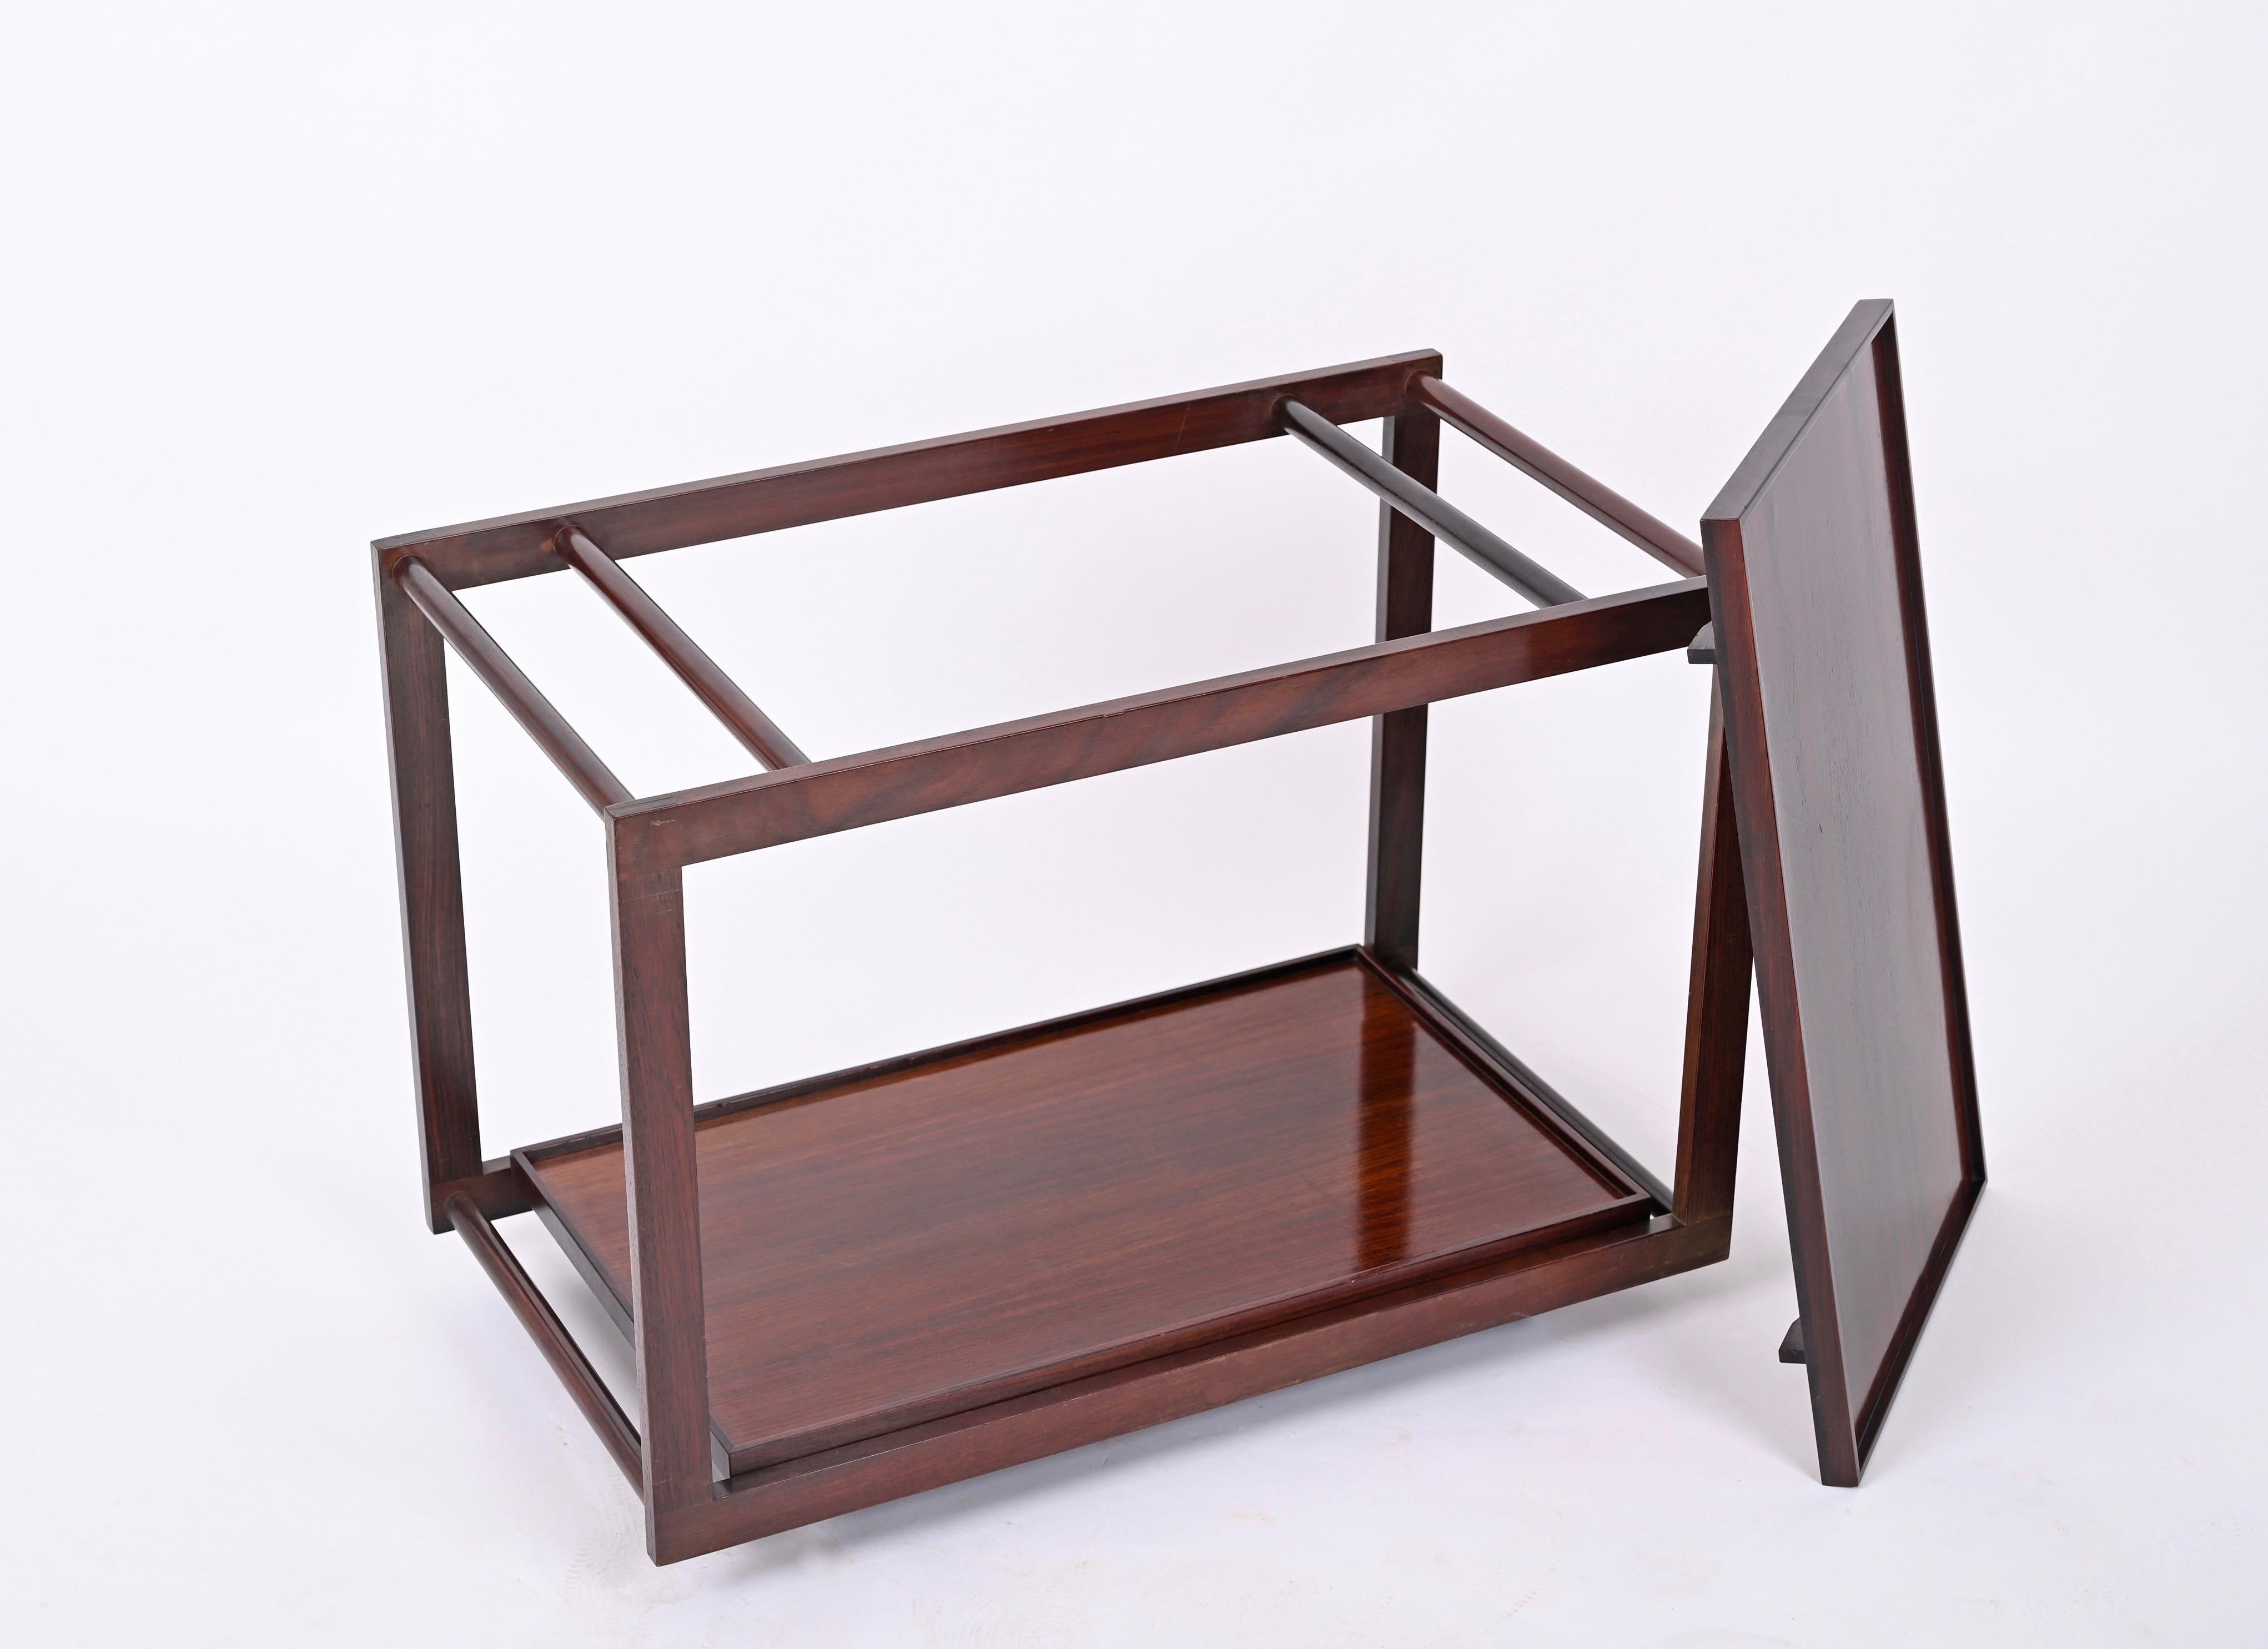 Mid-20th Century Serving Bar Cart by Frattini for Cassina Signed, Teak Wood and Metal, Italy 1950